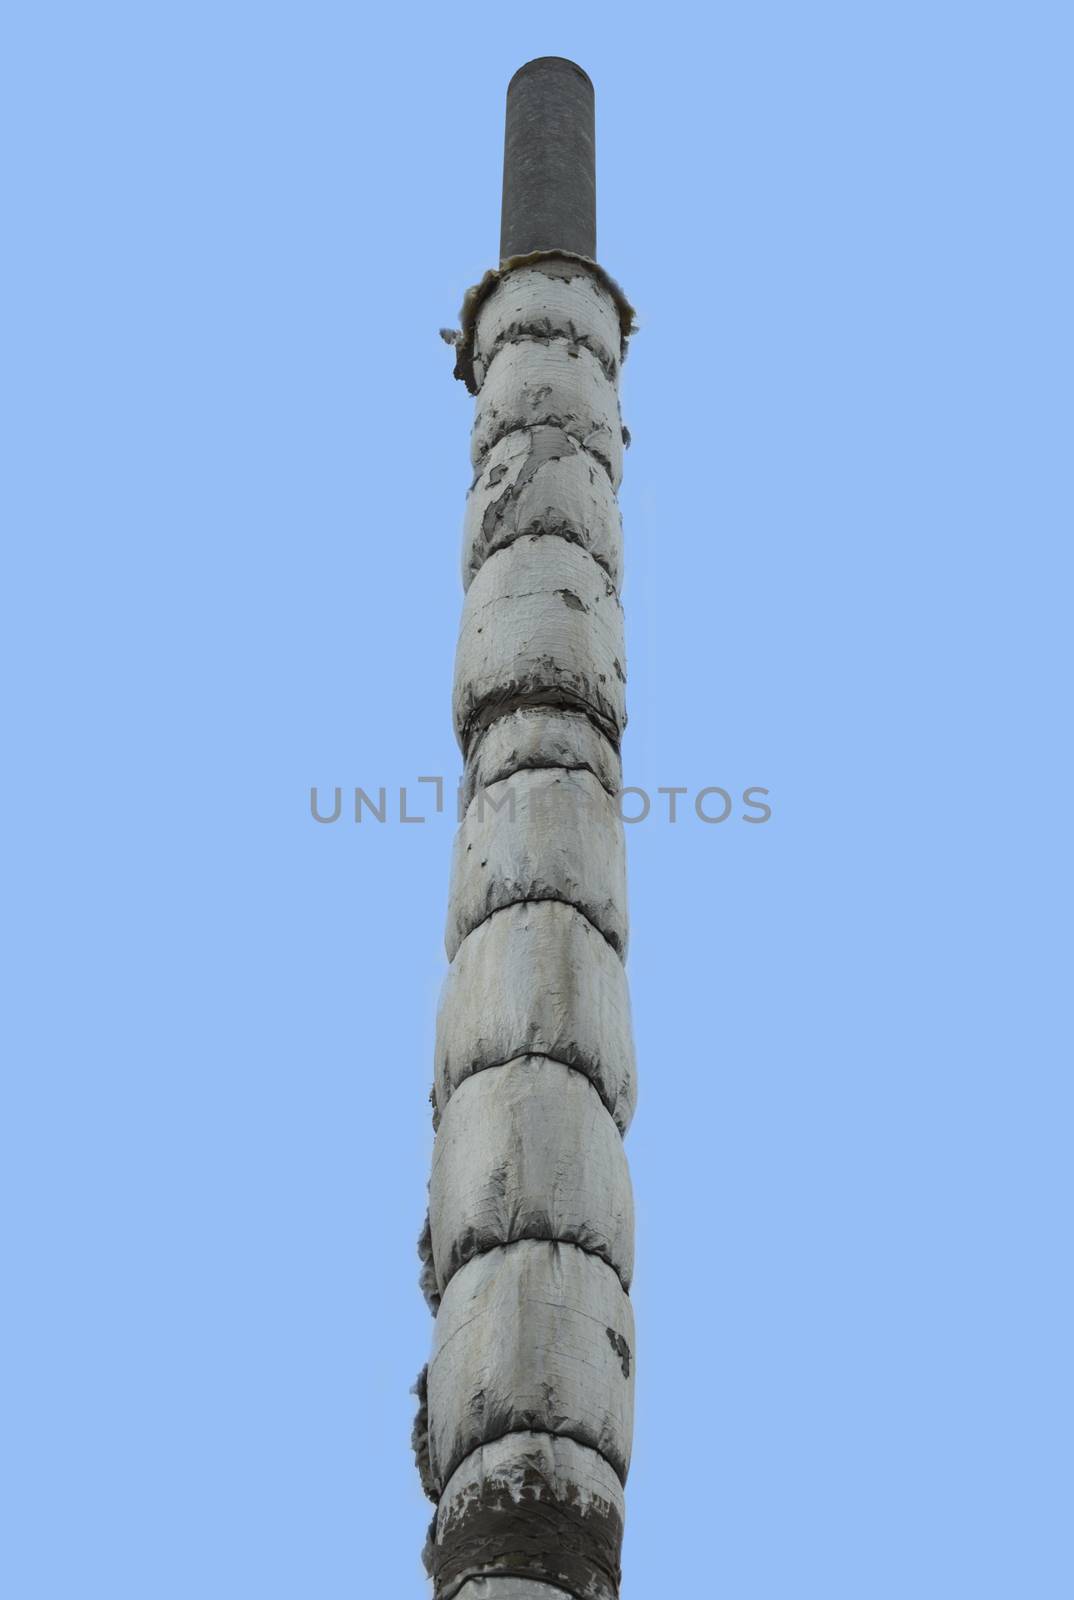 chimney. For your commercial and editorial use